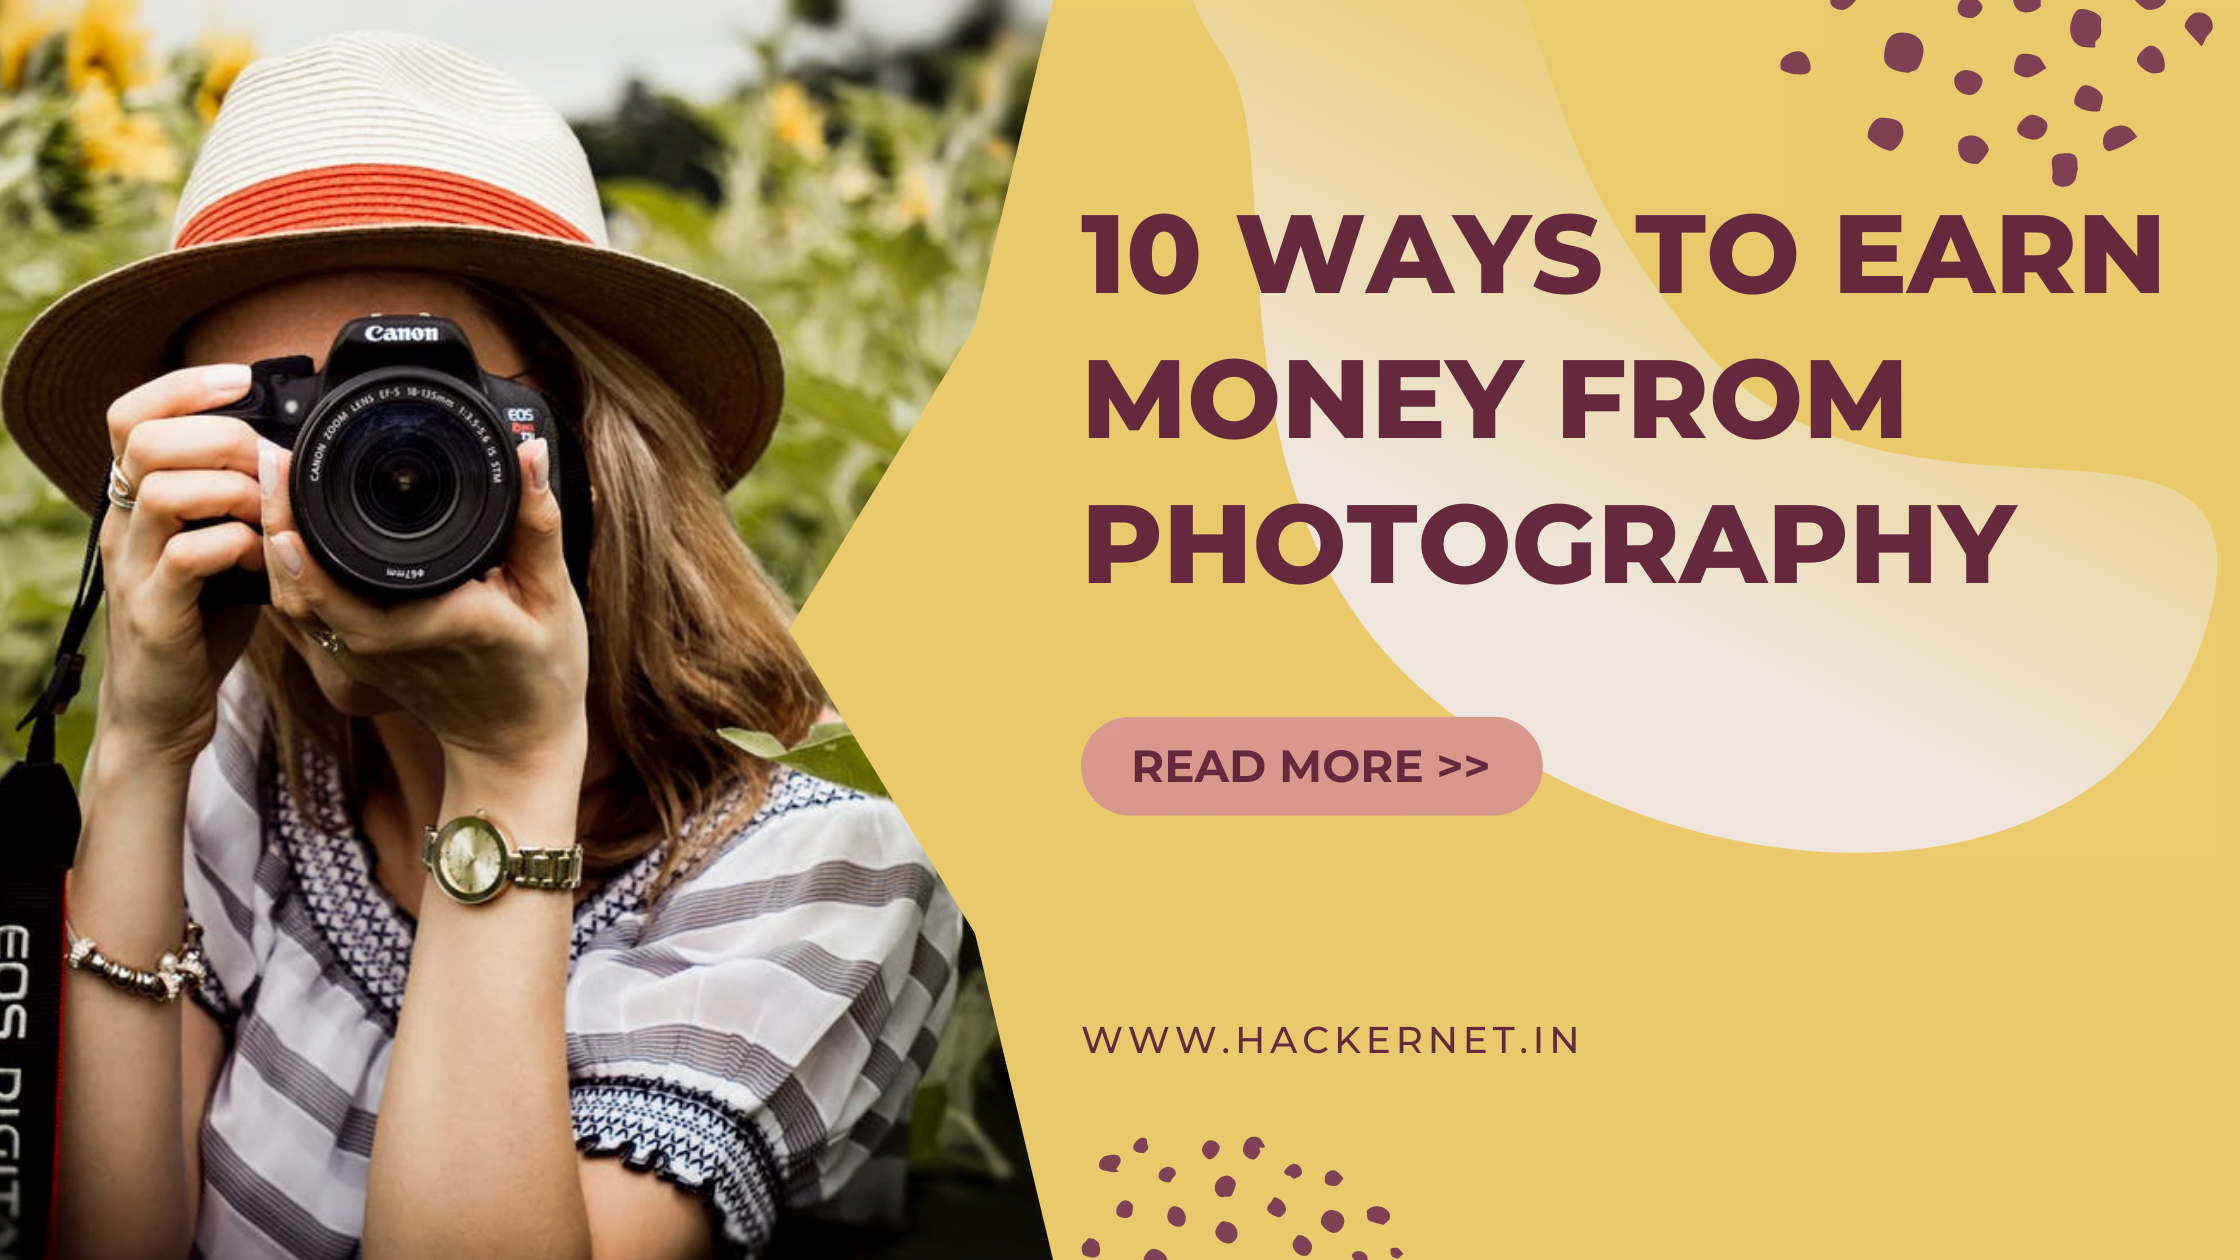 Top 10 Ways to Earn Money from Photography